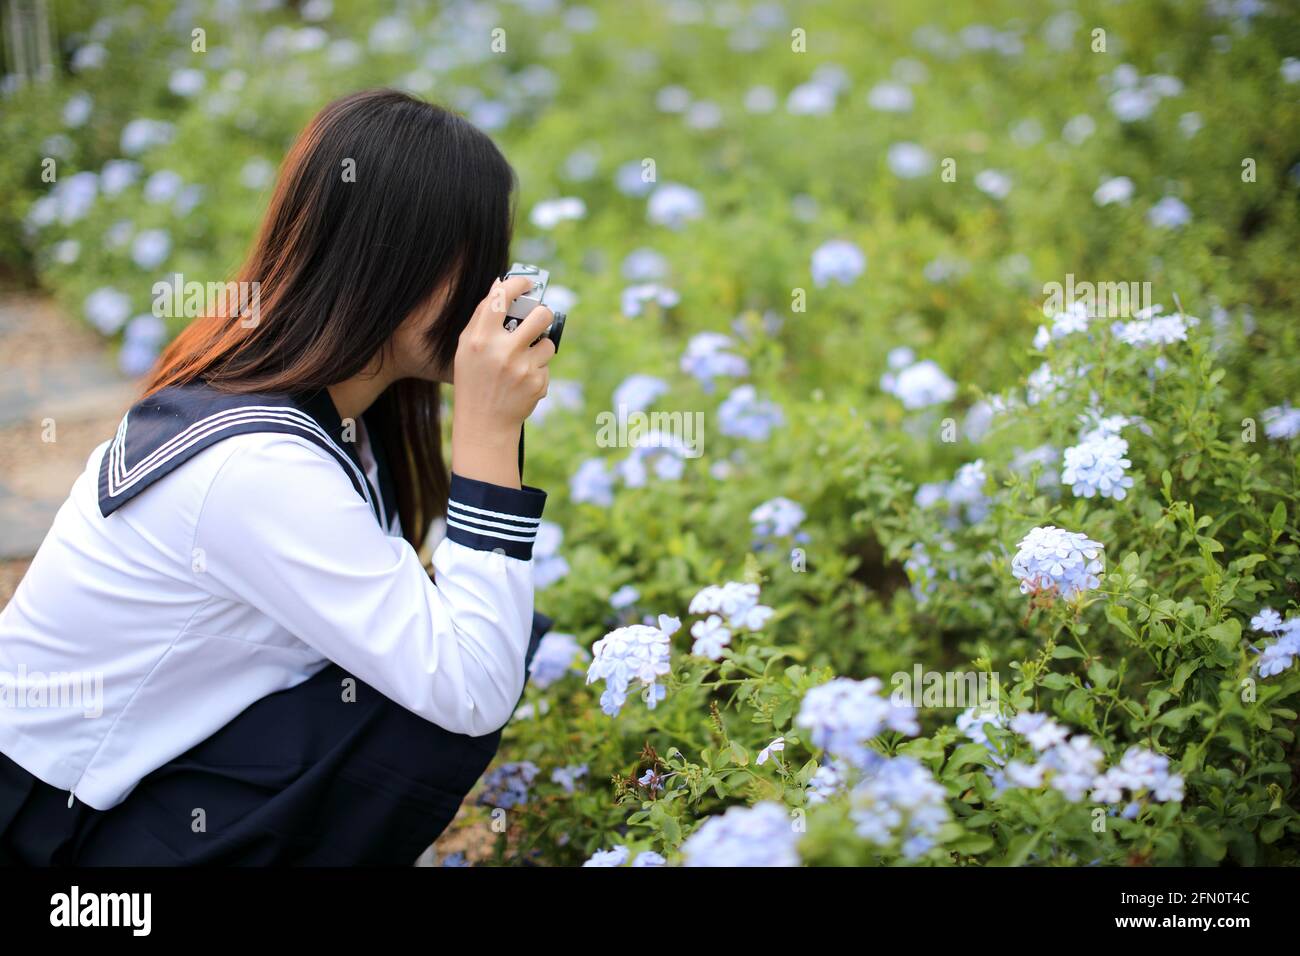 Asian school girl with camera taking photo a flowers in garden Stock Photo